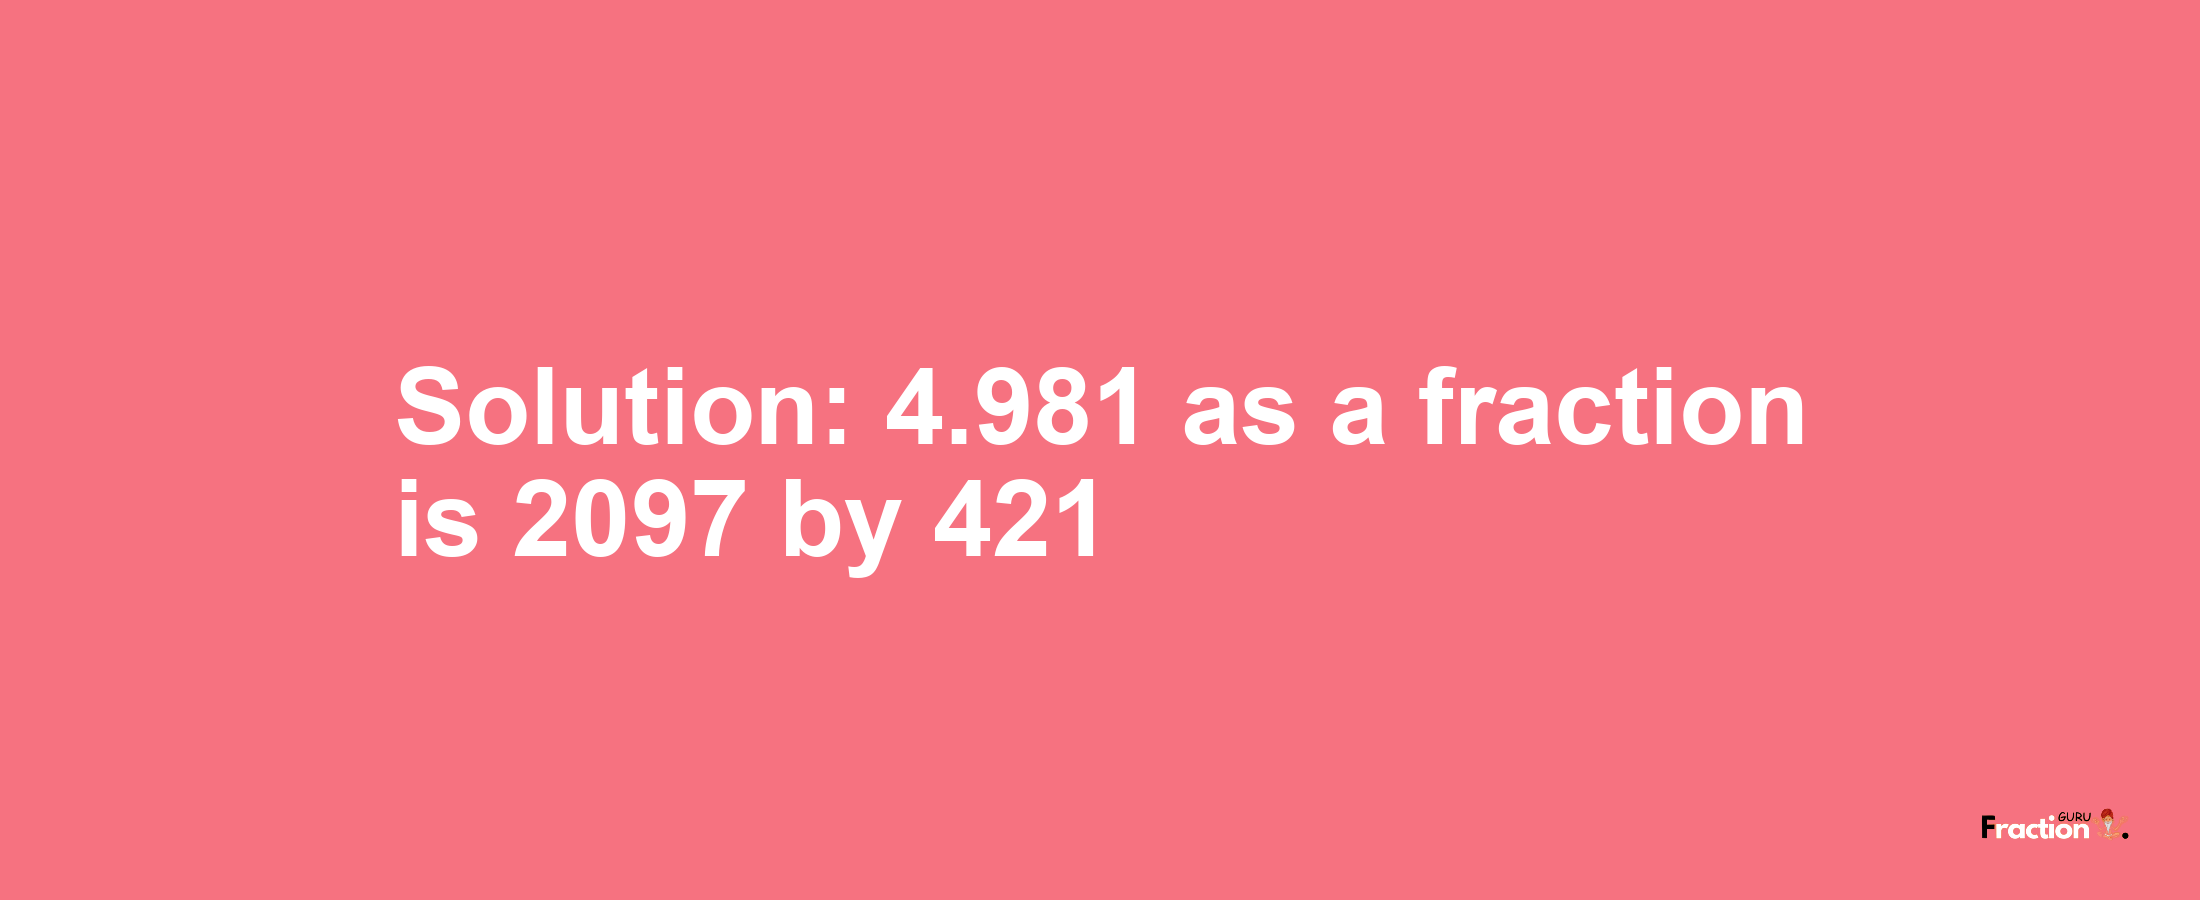 Solution:4.981 as a fraction is 2097/421